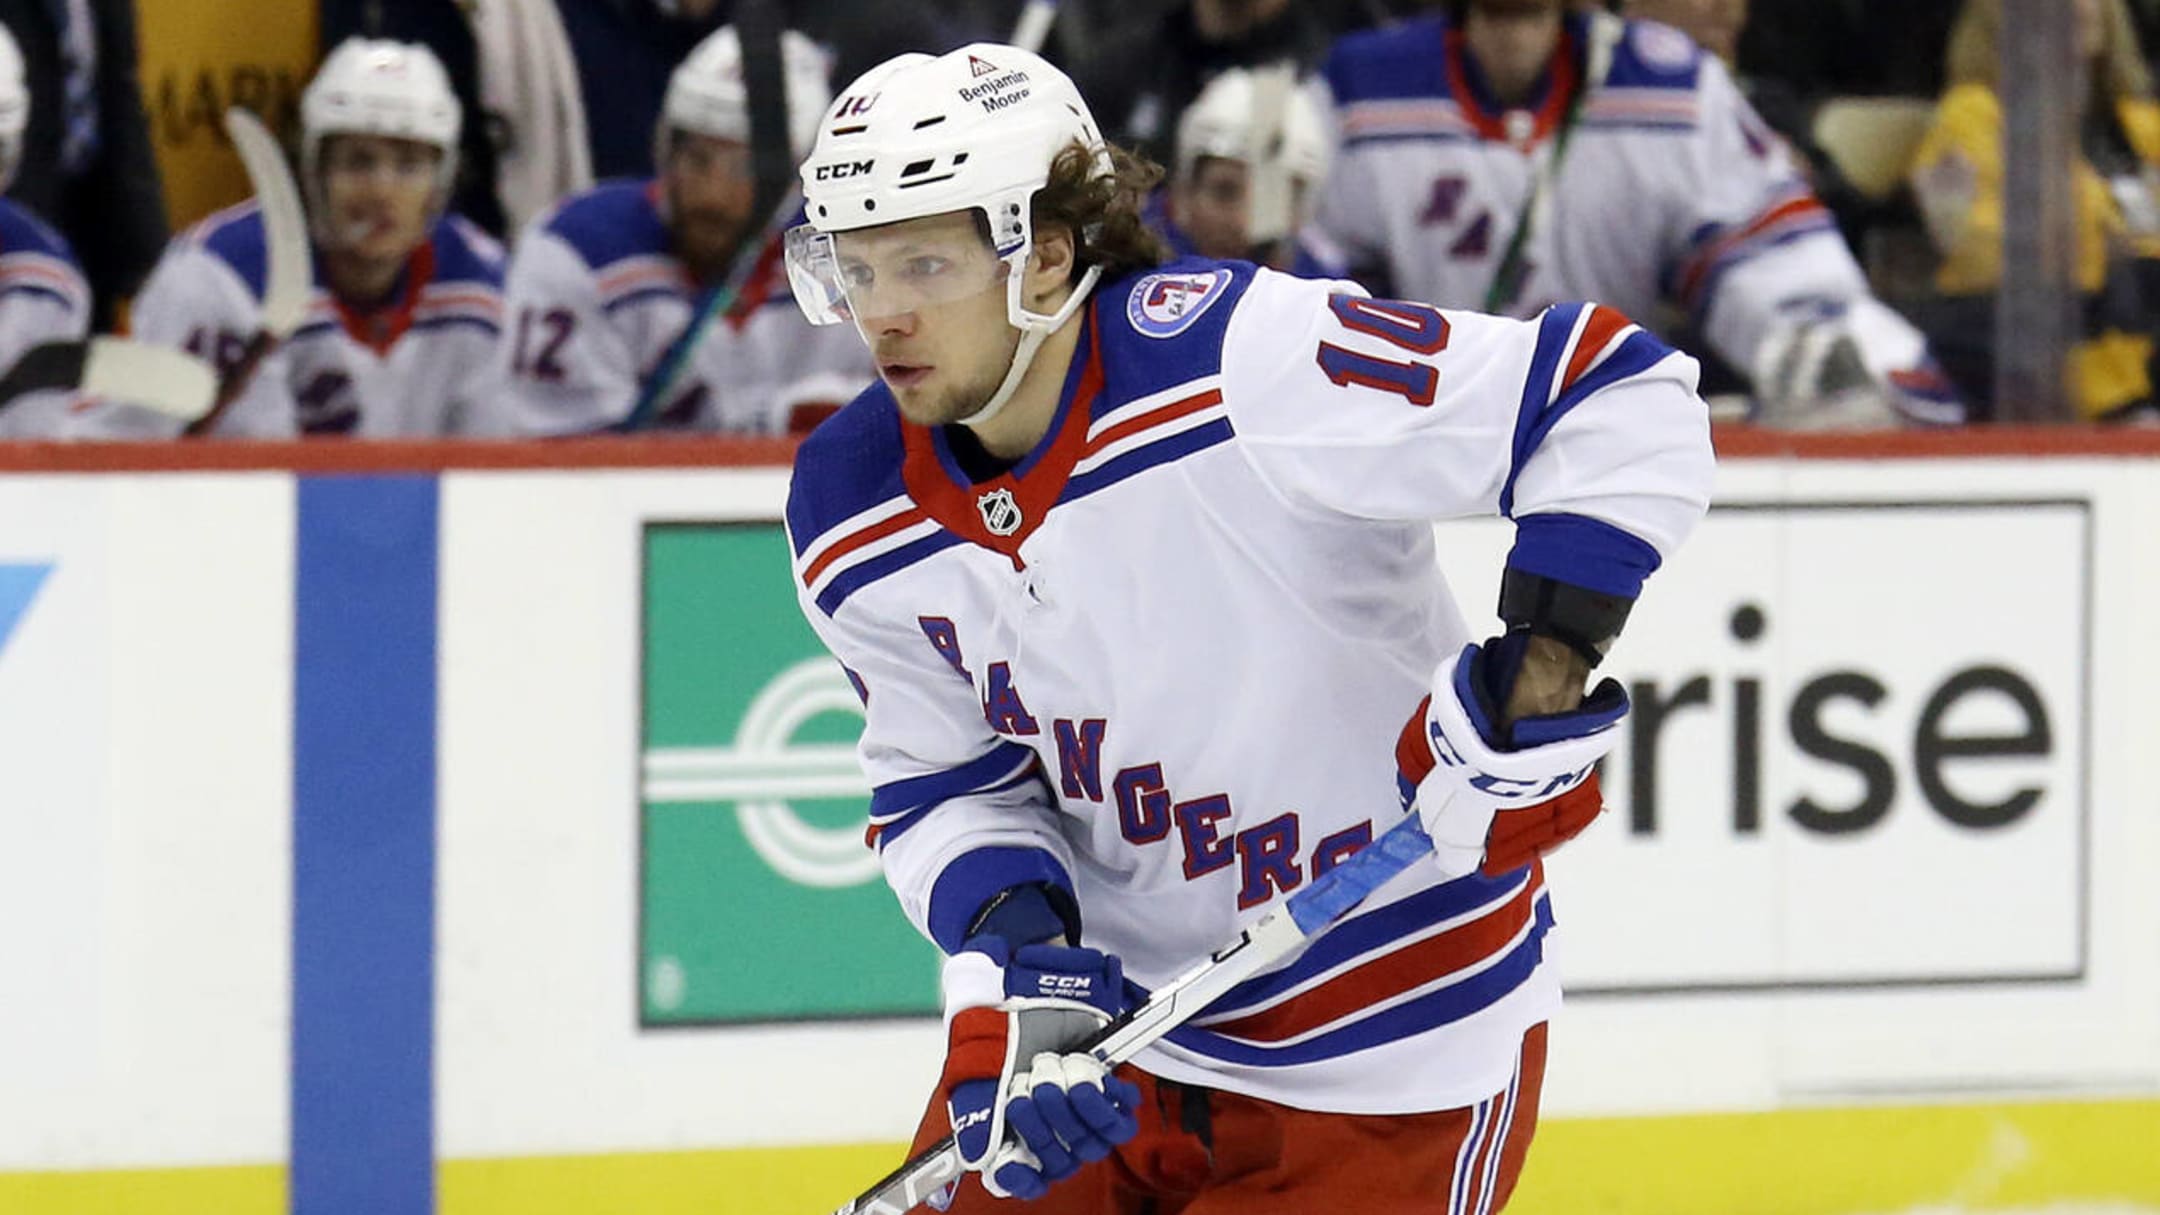 Artemi Panarin lifts Rangers past Penguins 4-3 in OT in Game 7